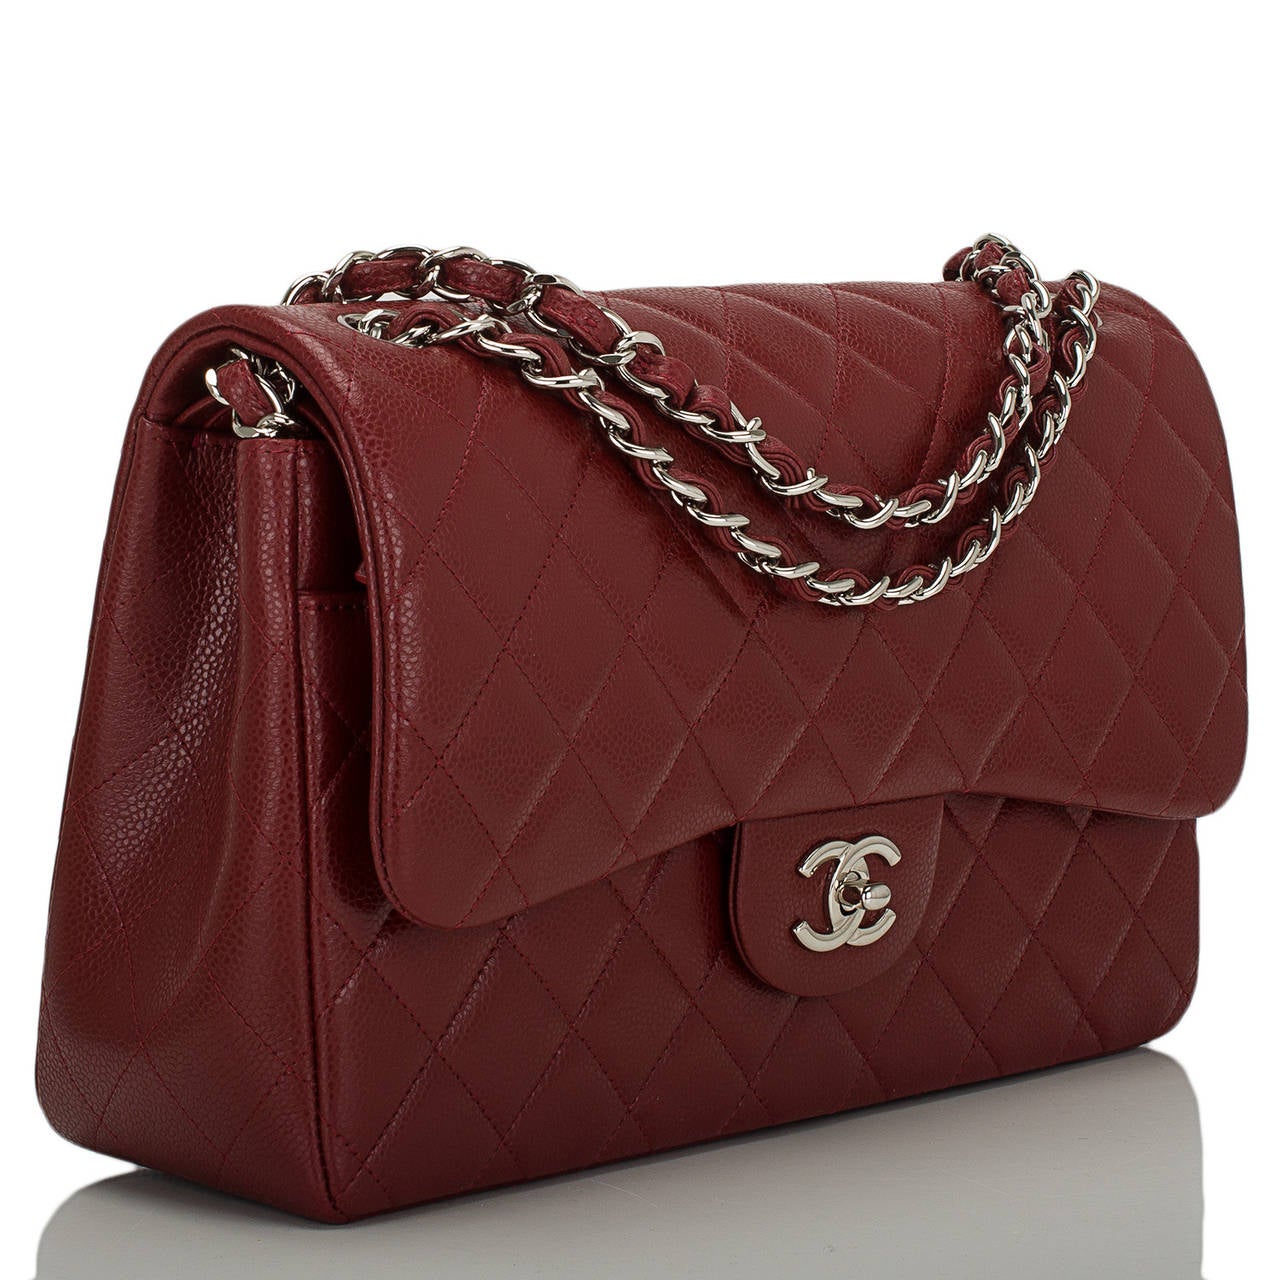 Chanel maroon red Jumbo Classic double flap bag of quilted caviar with silver tone hardware.

This Jumbo Classic double flap is striking in a rich deep maroon red caviar. It features a front flap with signature CC turnlock closure, half moon back